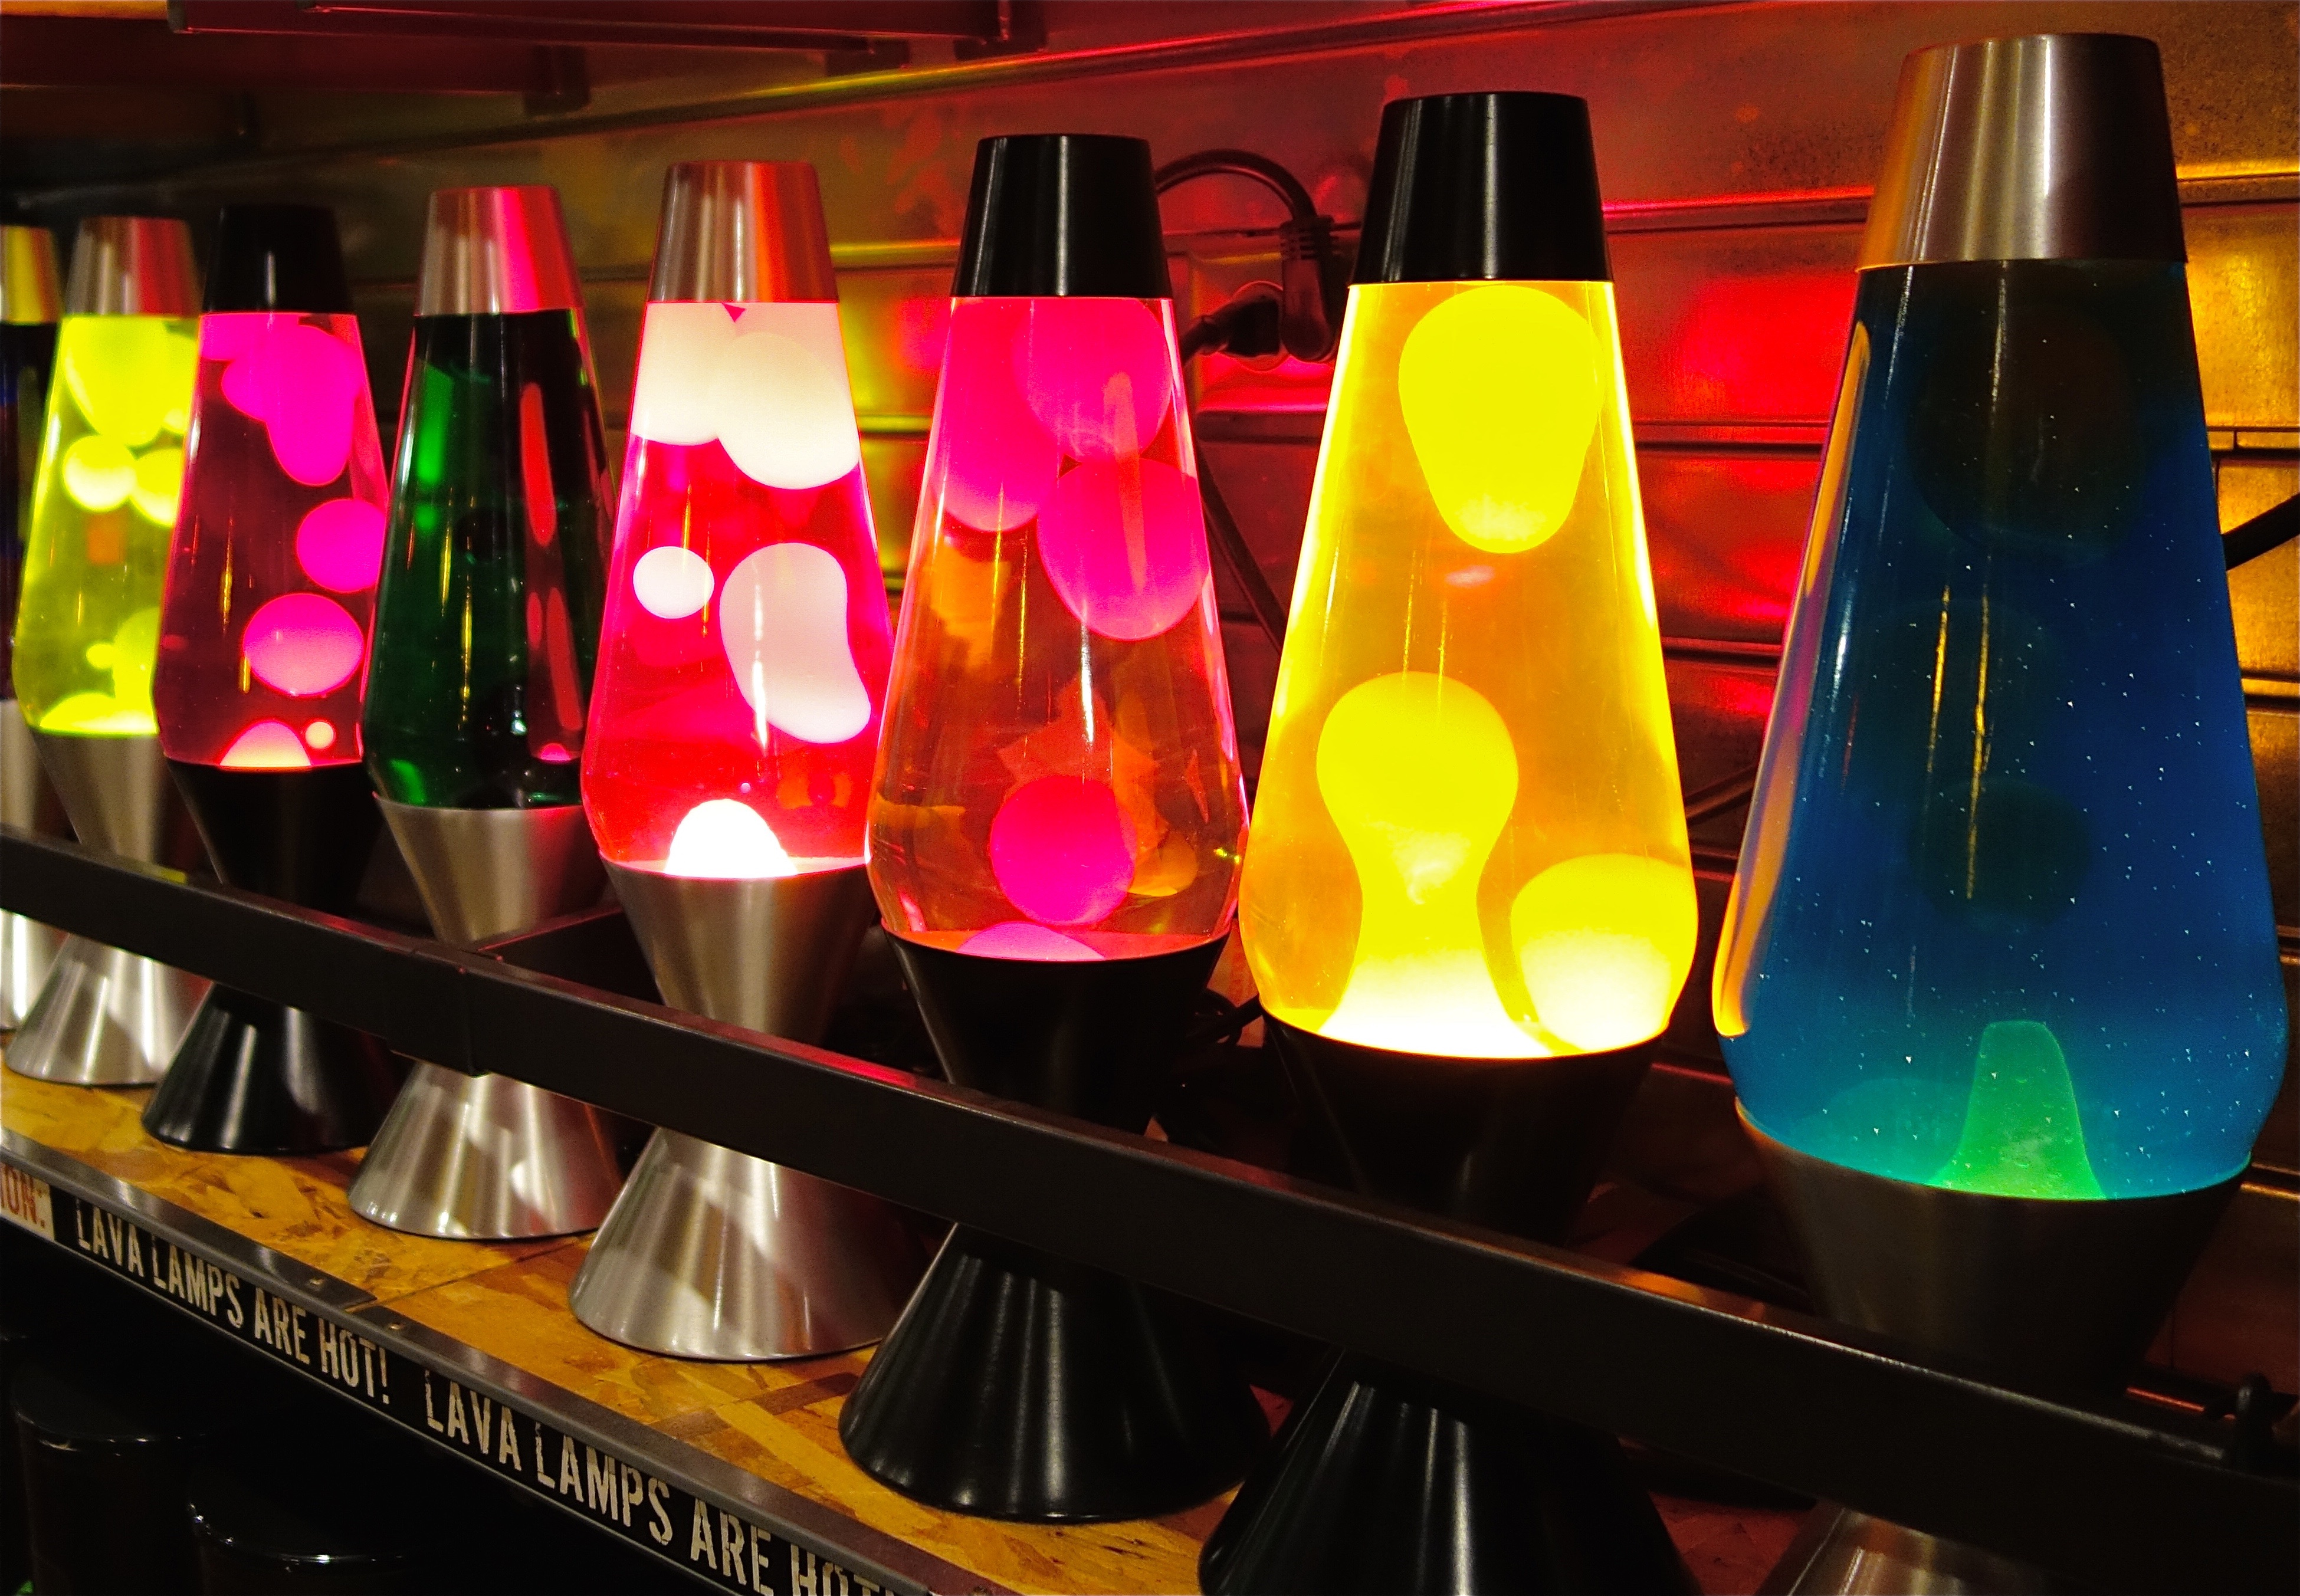 Green, yellow, pink, red, and blue lava lamps